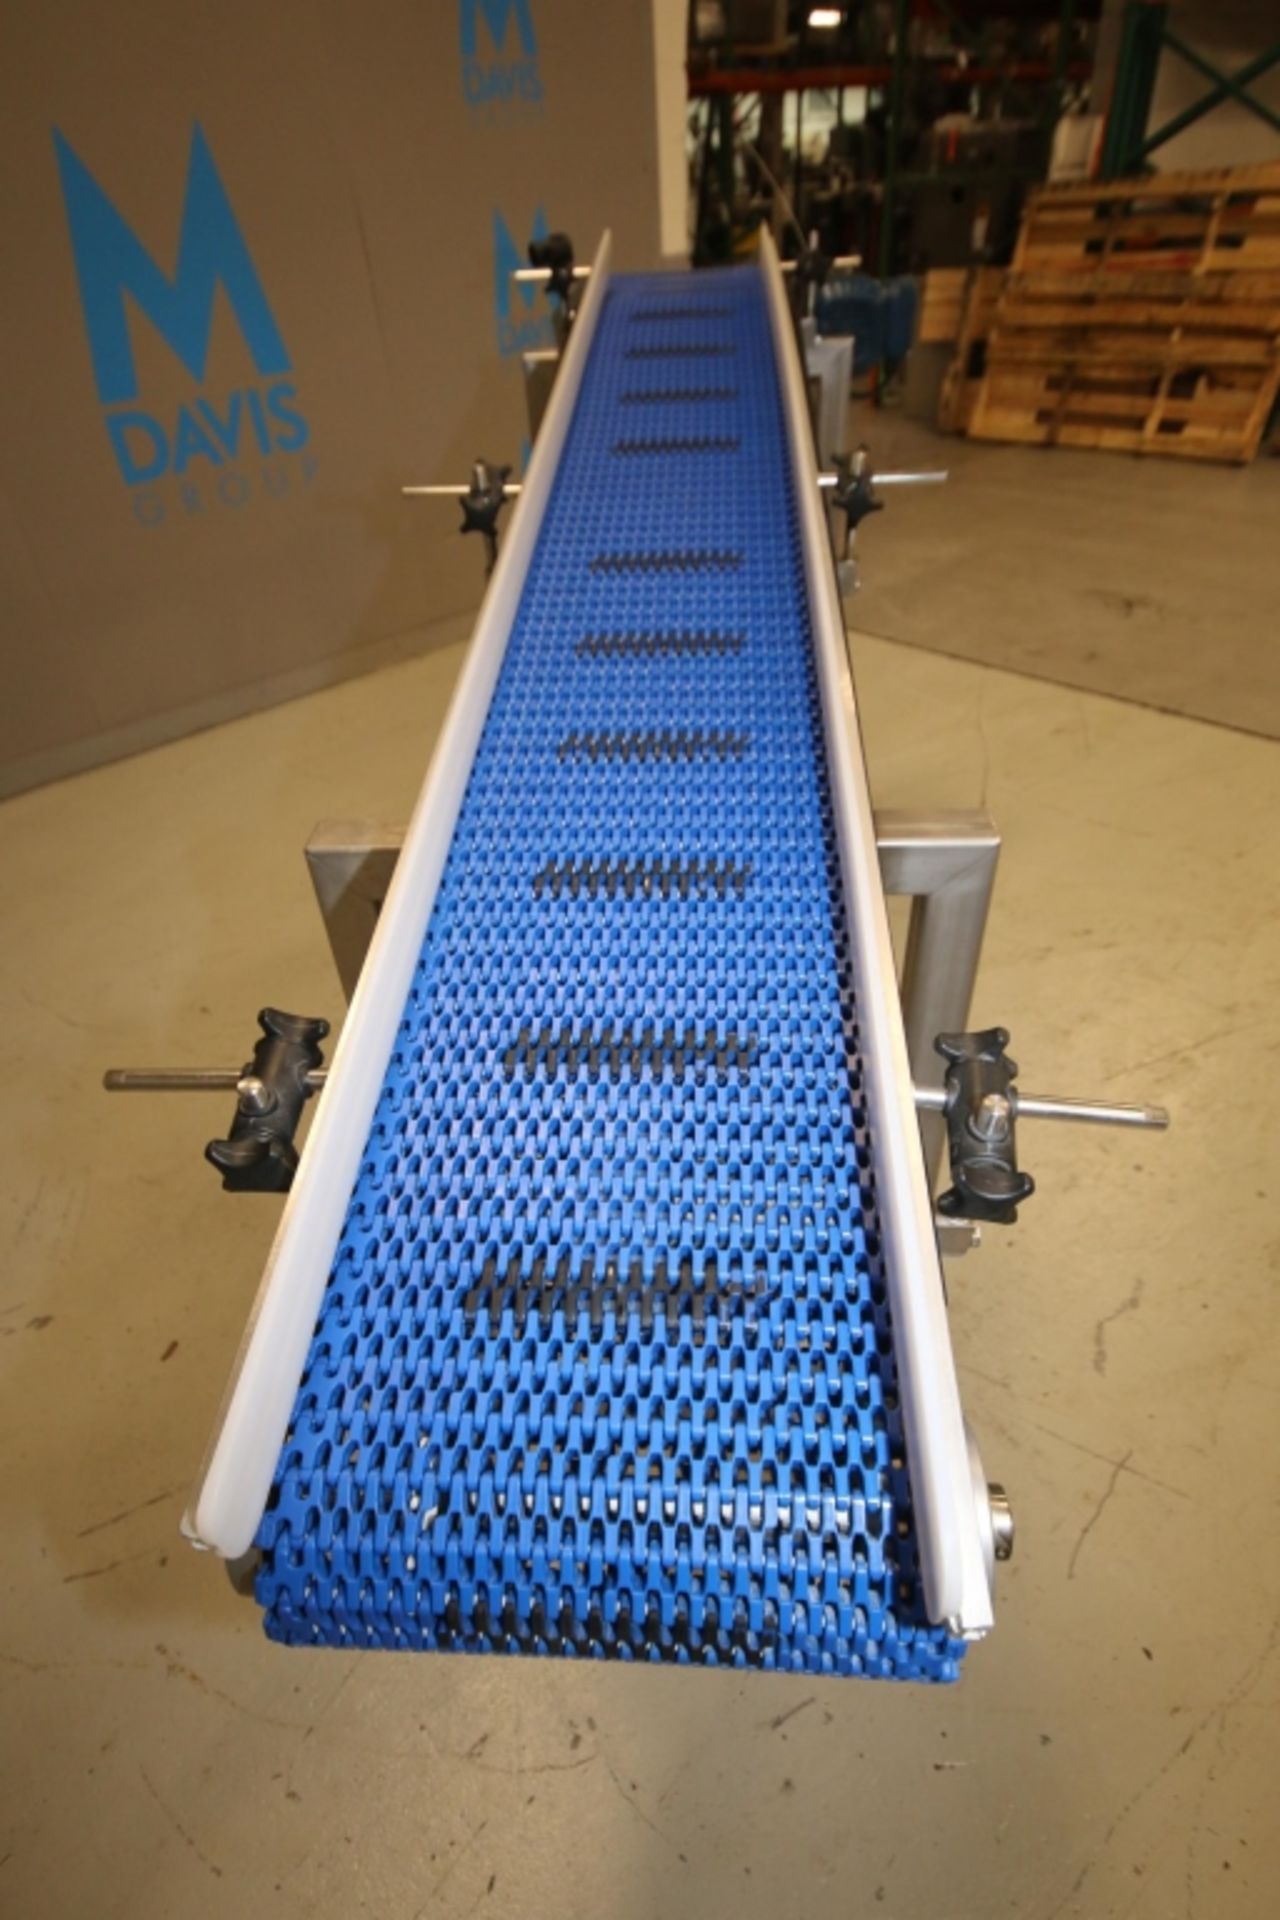 88" L x 12" W x 36" to 48" H Portable S/S InclinedProduct Conveyor with Intralox Type Belt, - Image 2 of 6